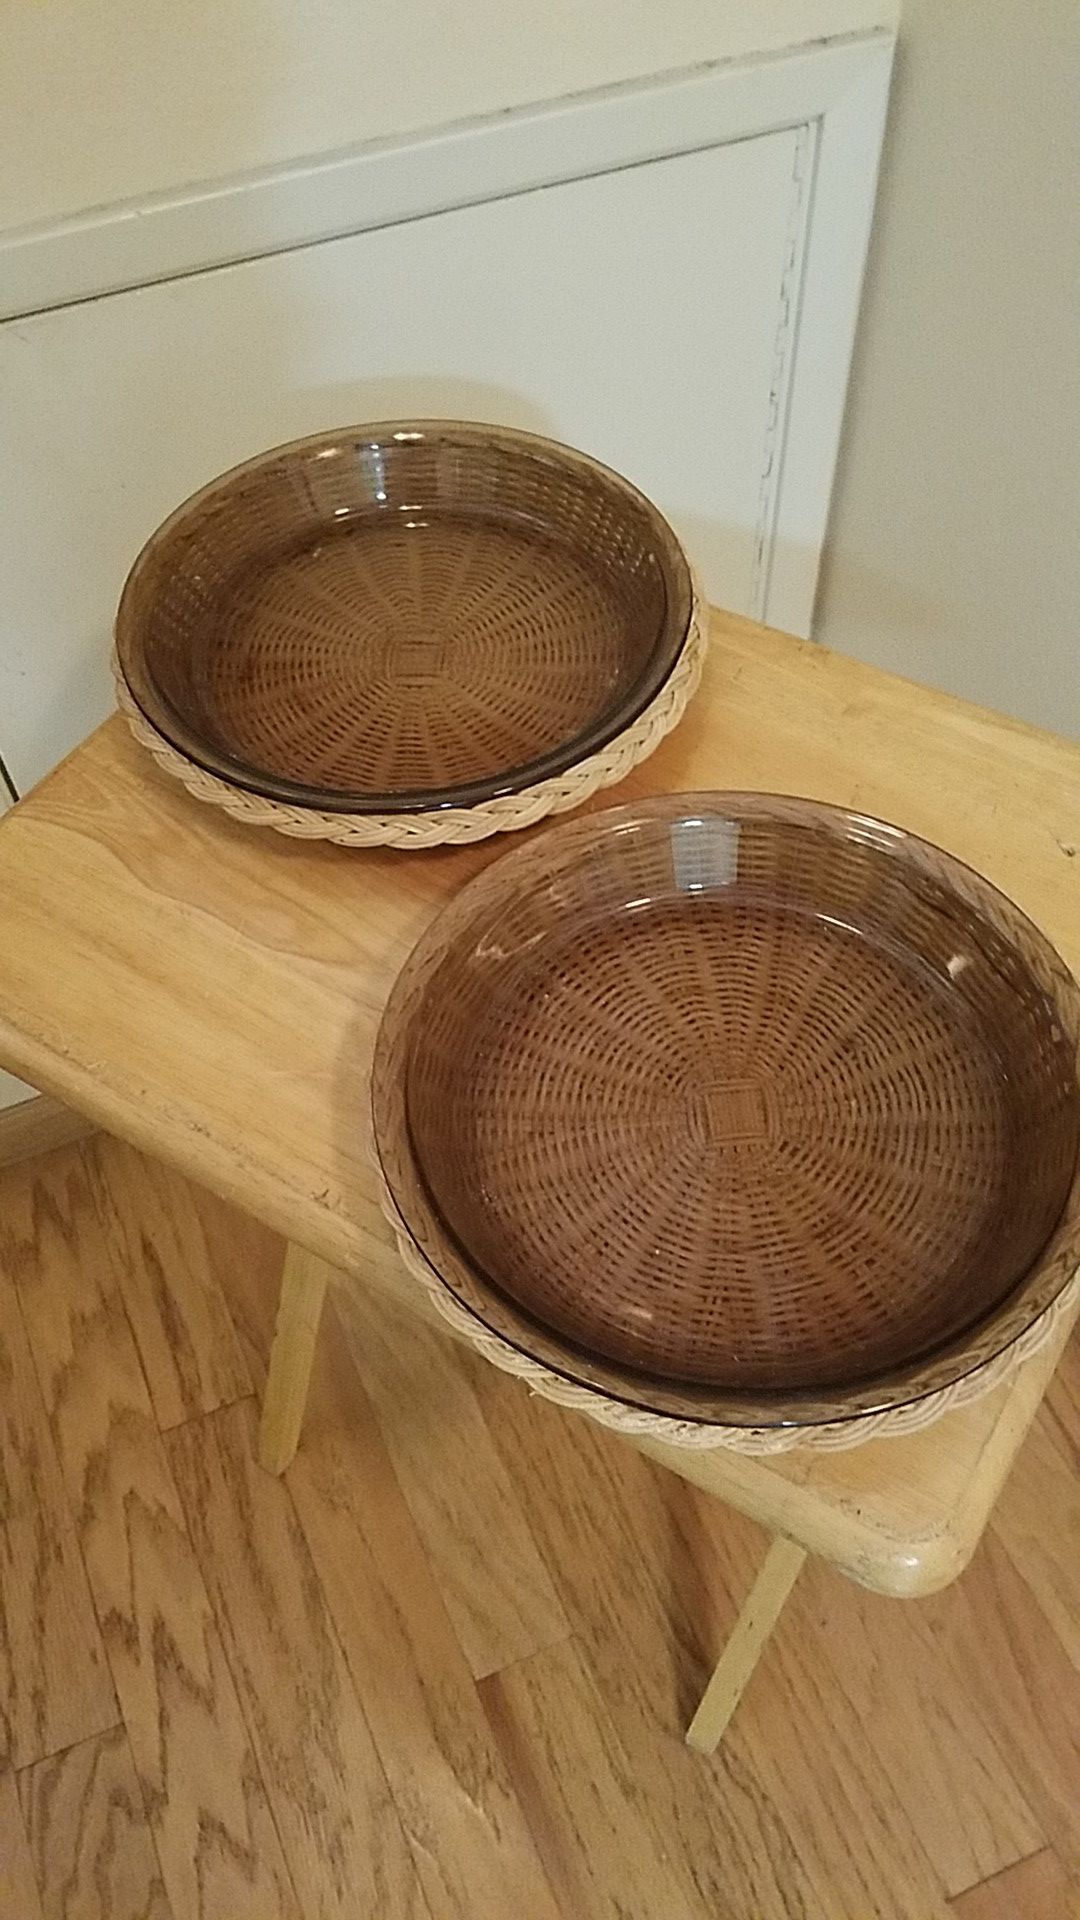 2 Pyrex Pie plates with baskets excellent condition. Used 1 x.